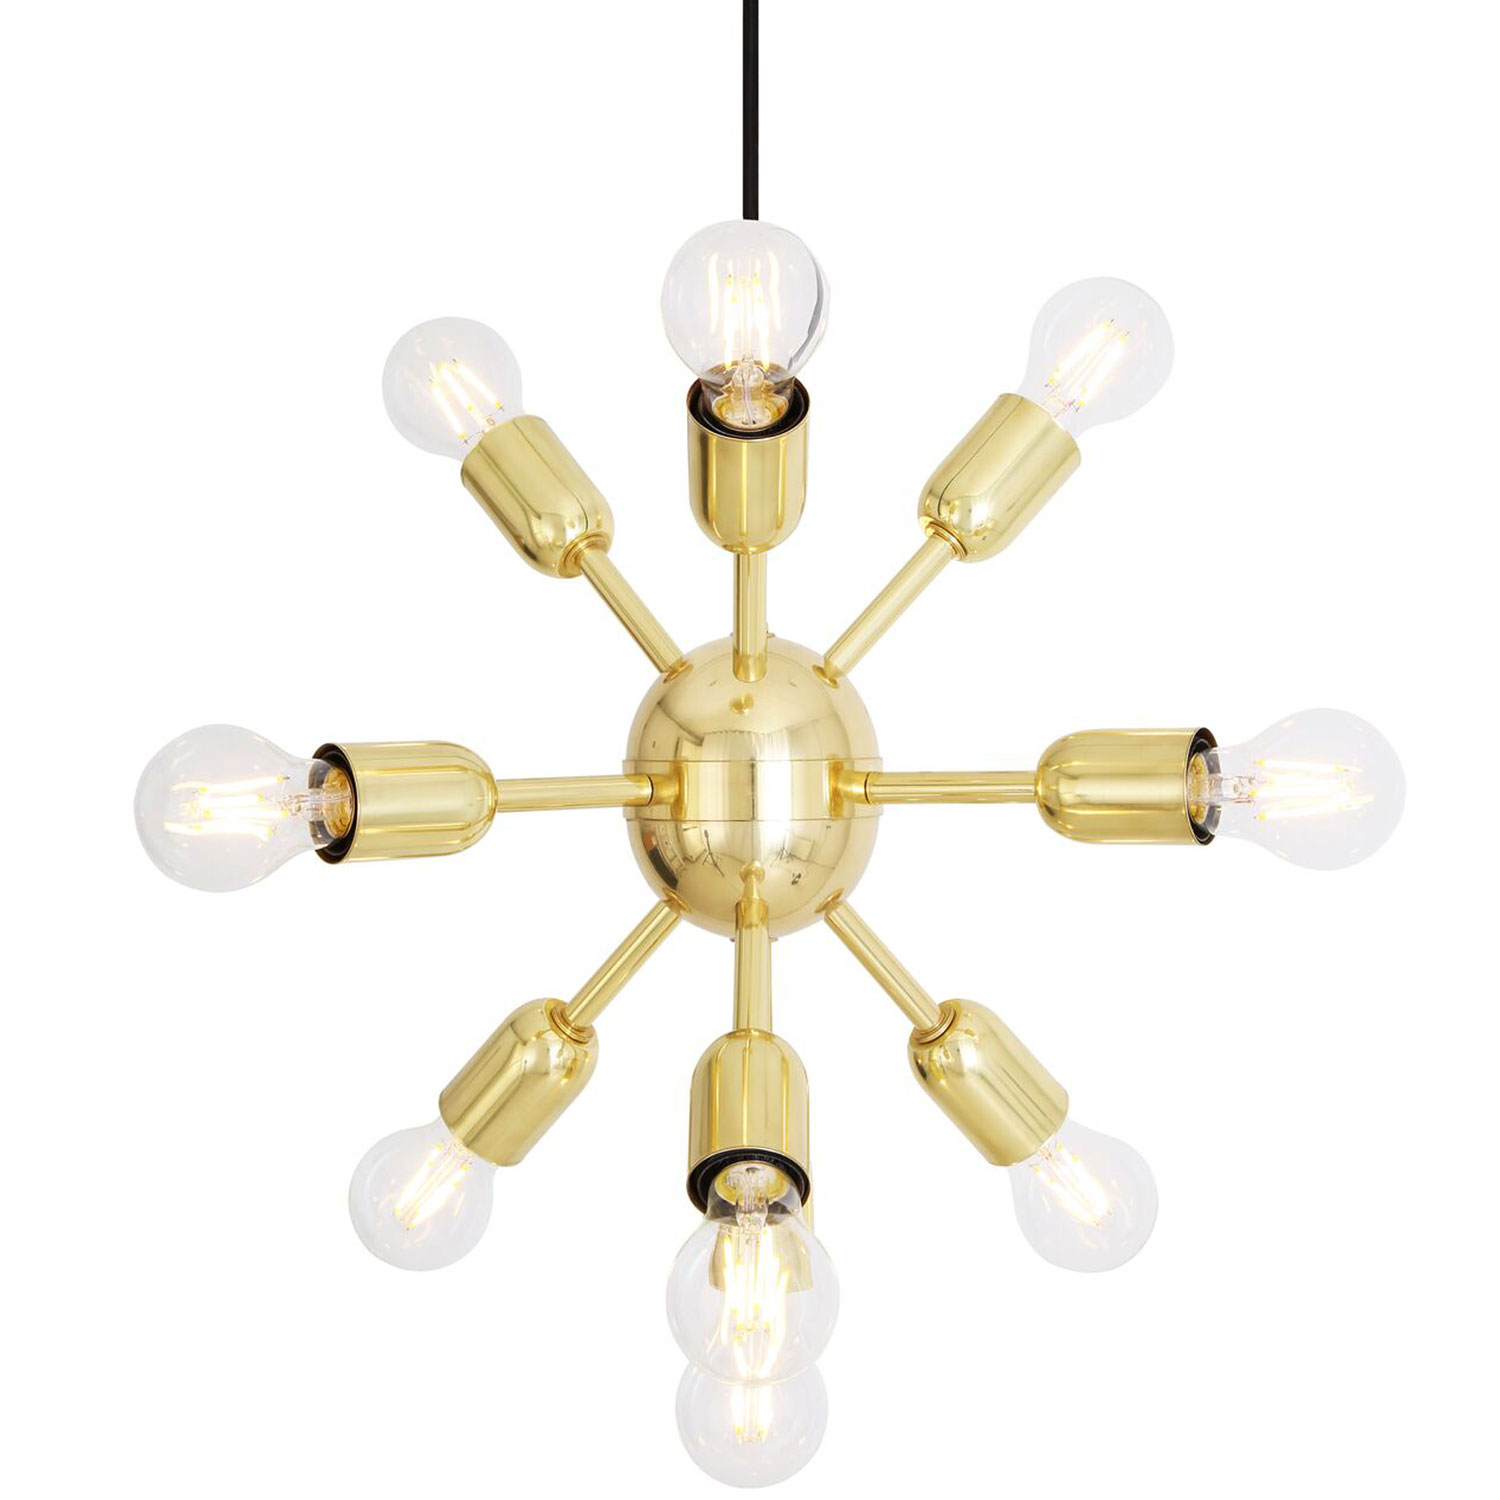 Large Sputnik-Style Chandelier with 20 or 24 Glass Spheres – Casa Lumi